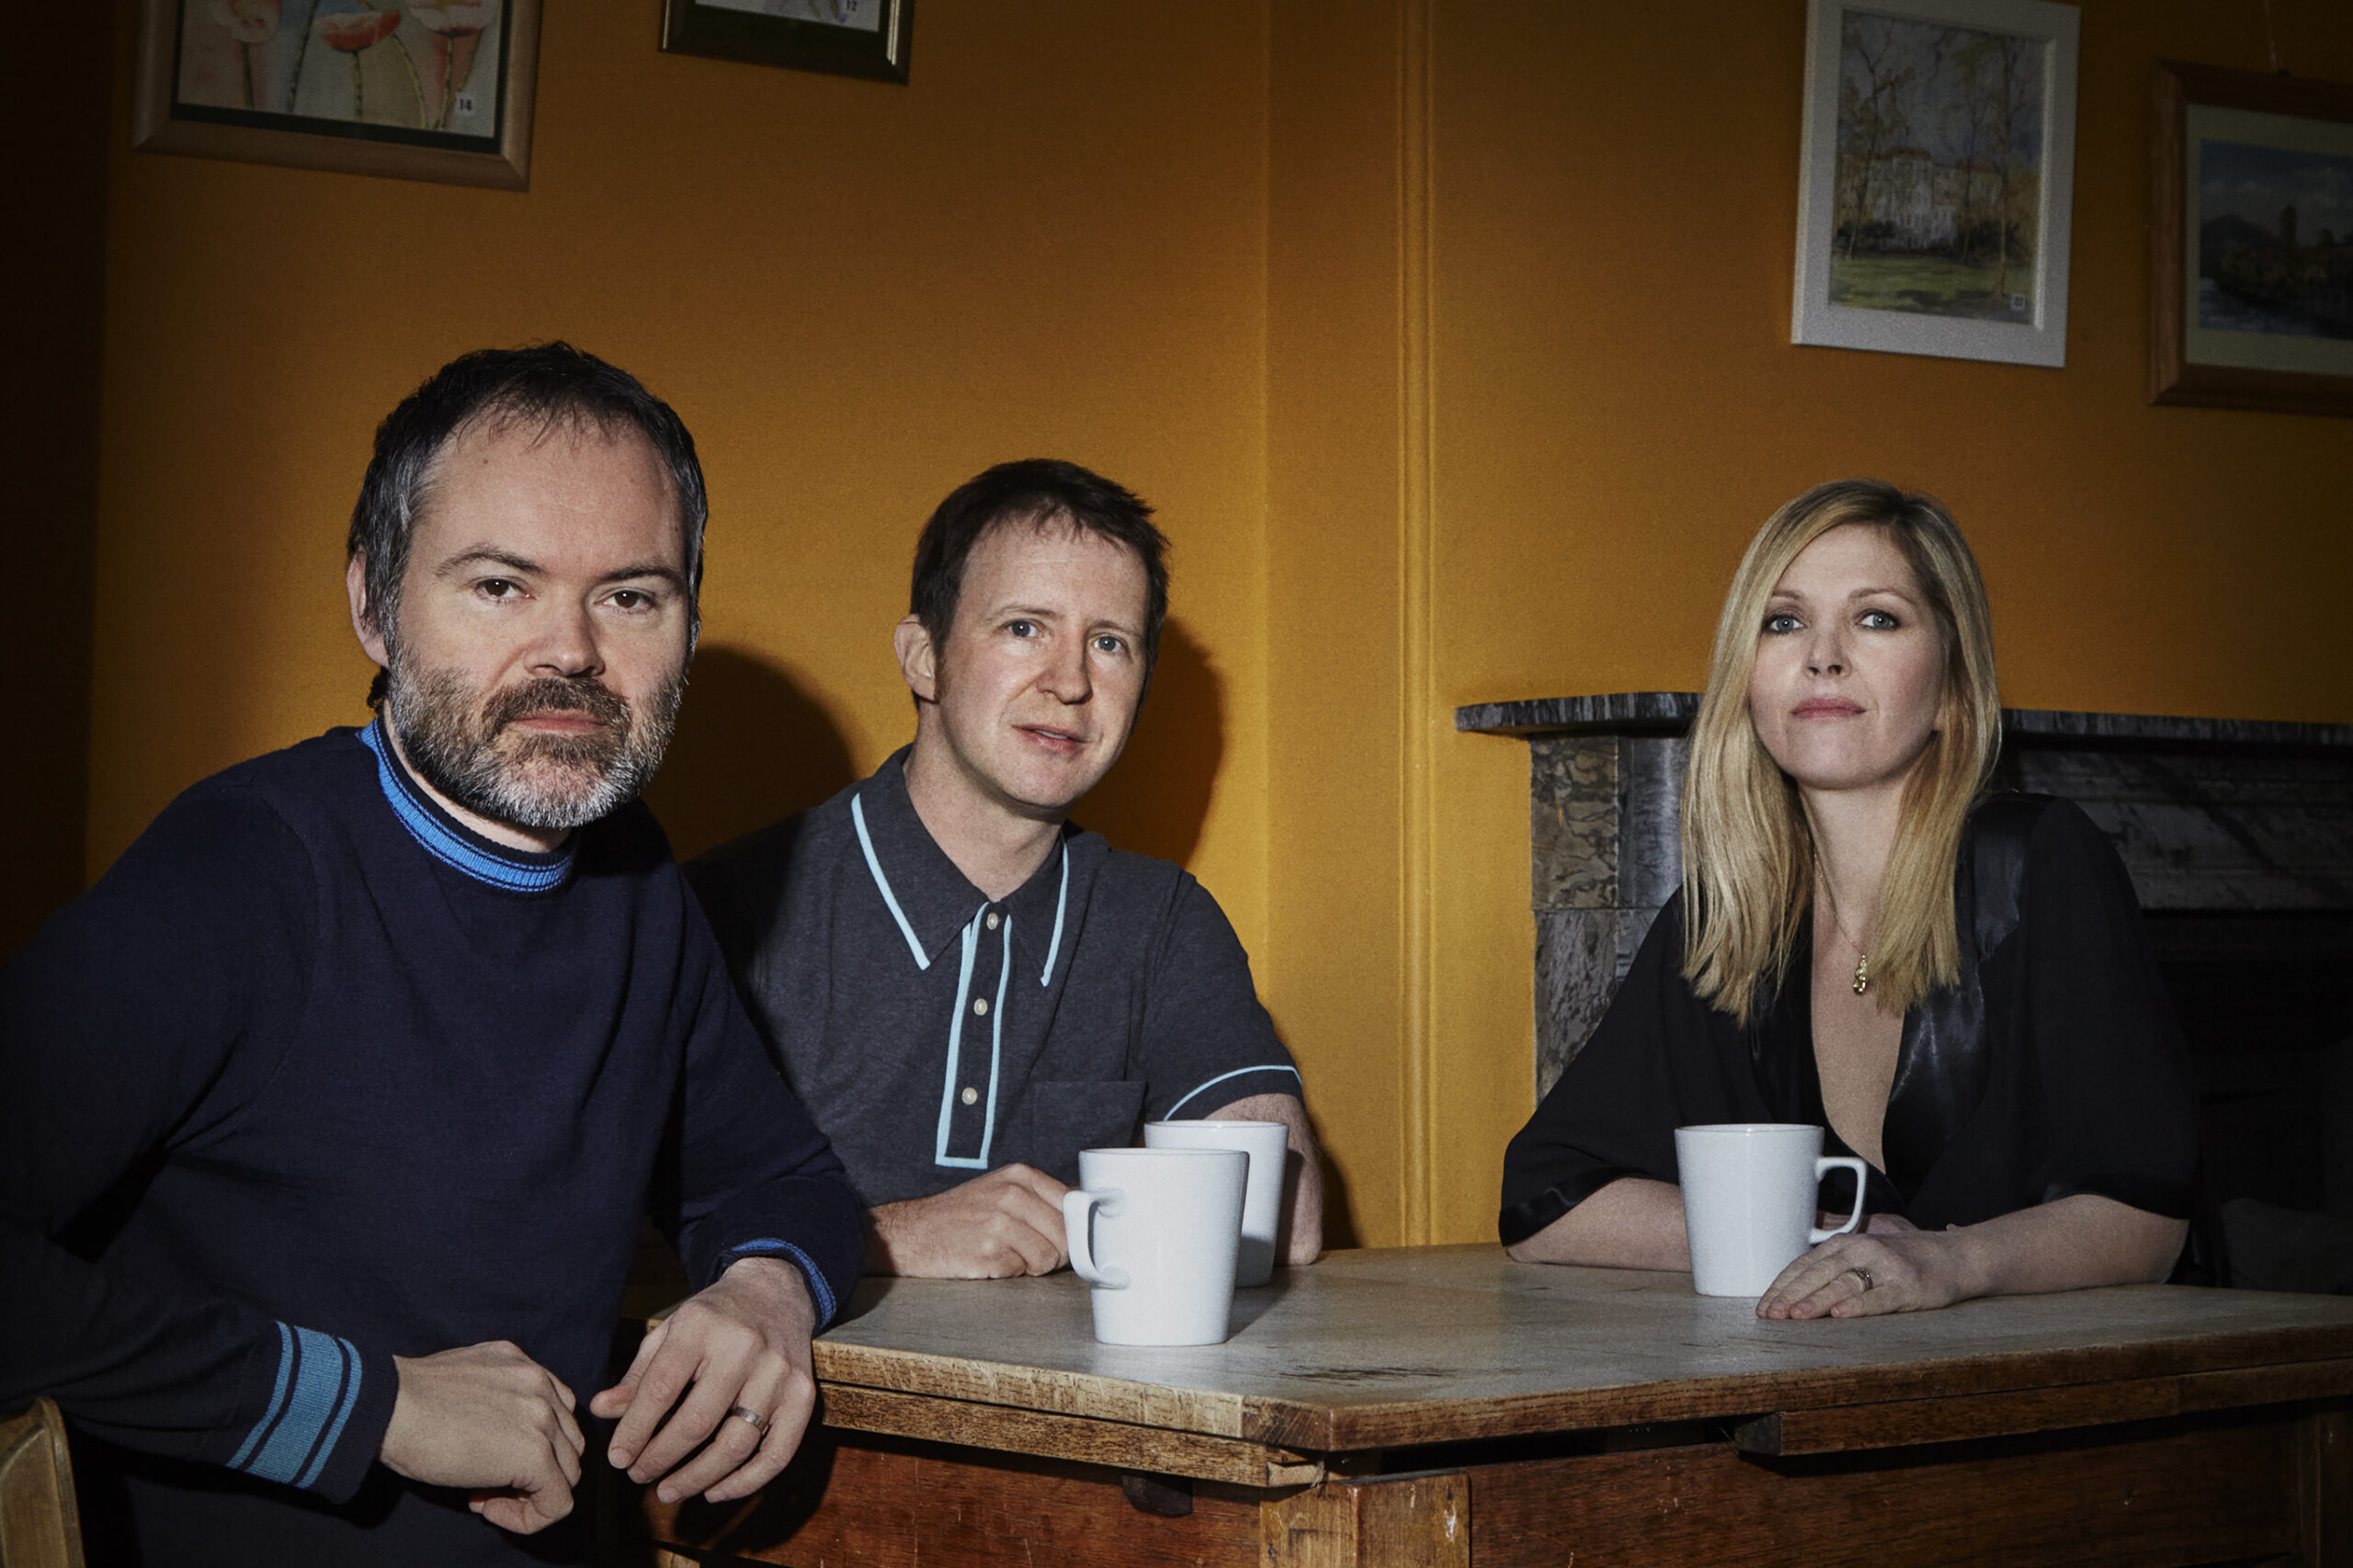 SAINT ETIENNE – I’ve Been Trying To Tell You